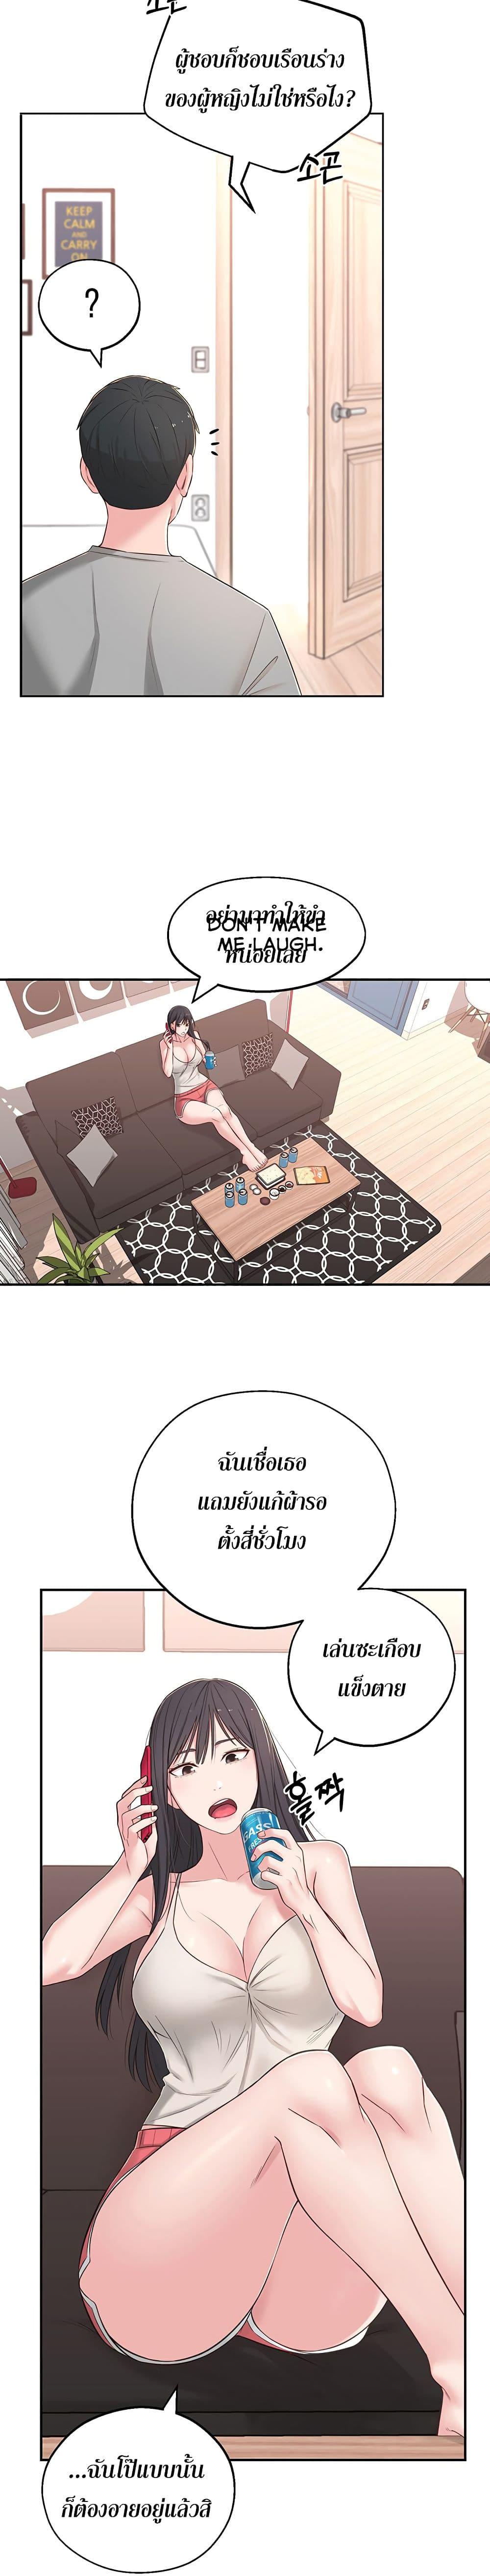 A Knowing Sister 5 ภาพ 11